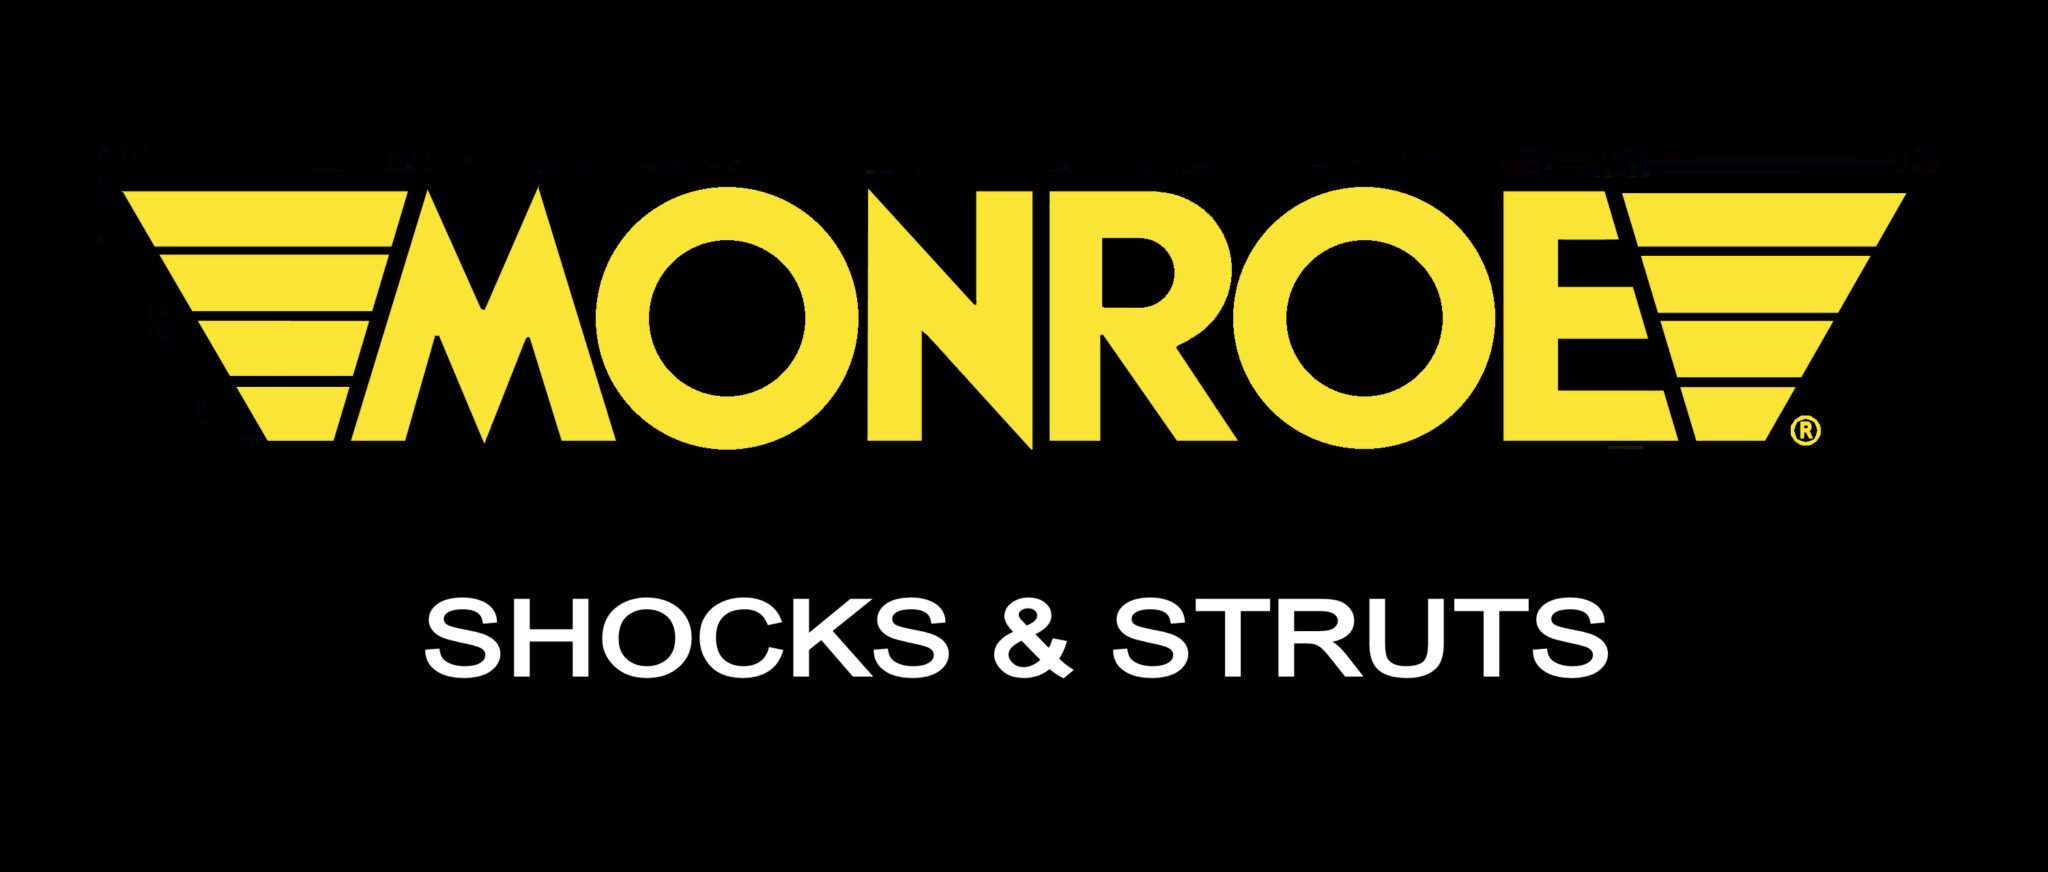 monroe-launches-shock-ing-rebate-promotion-tire-business